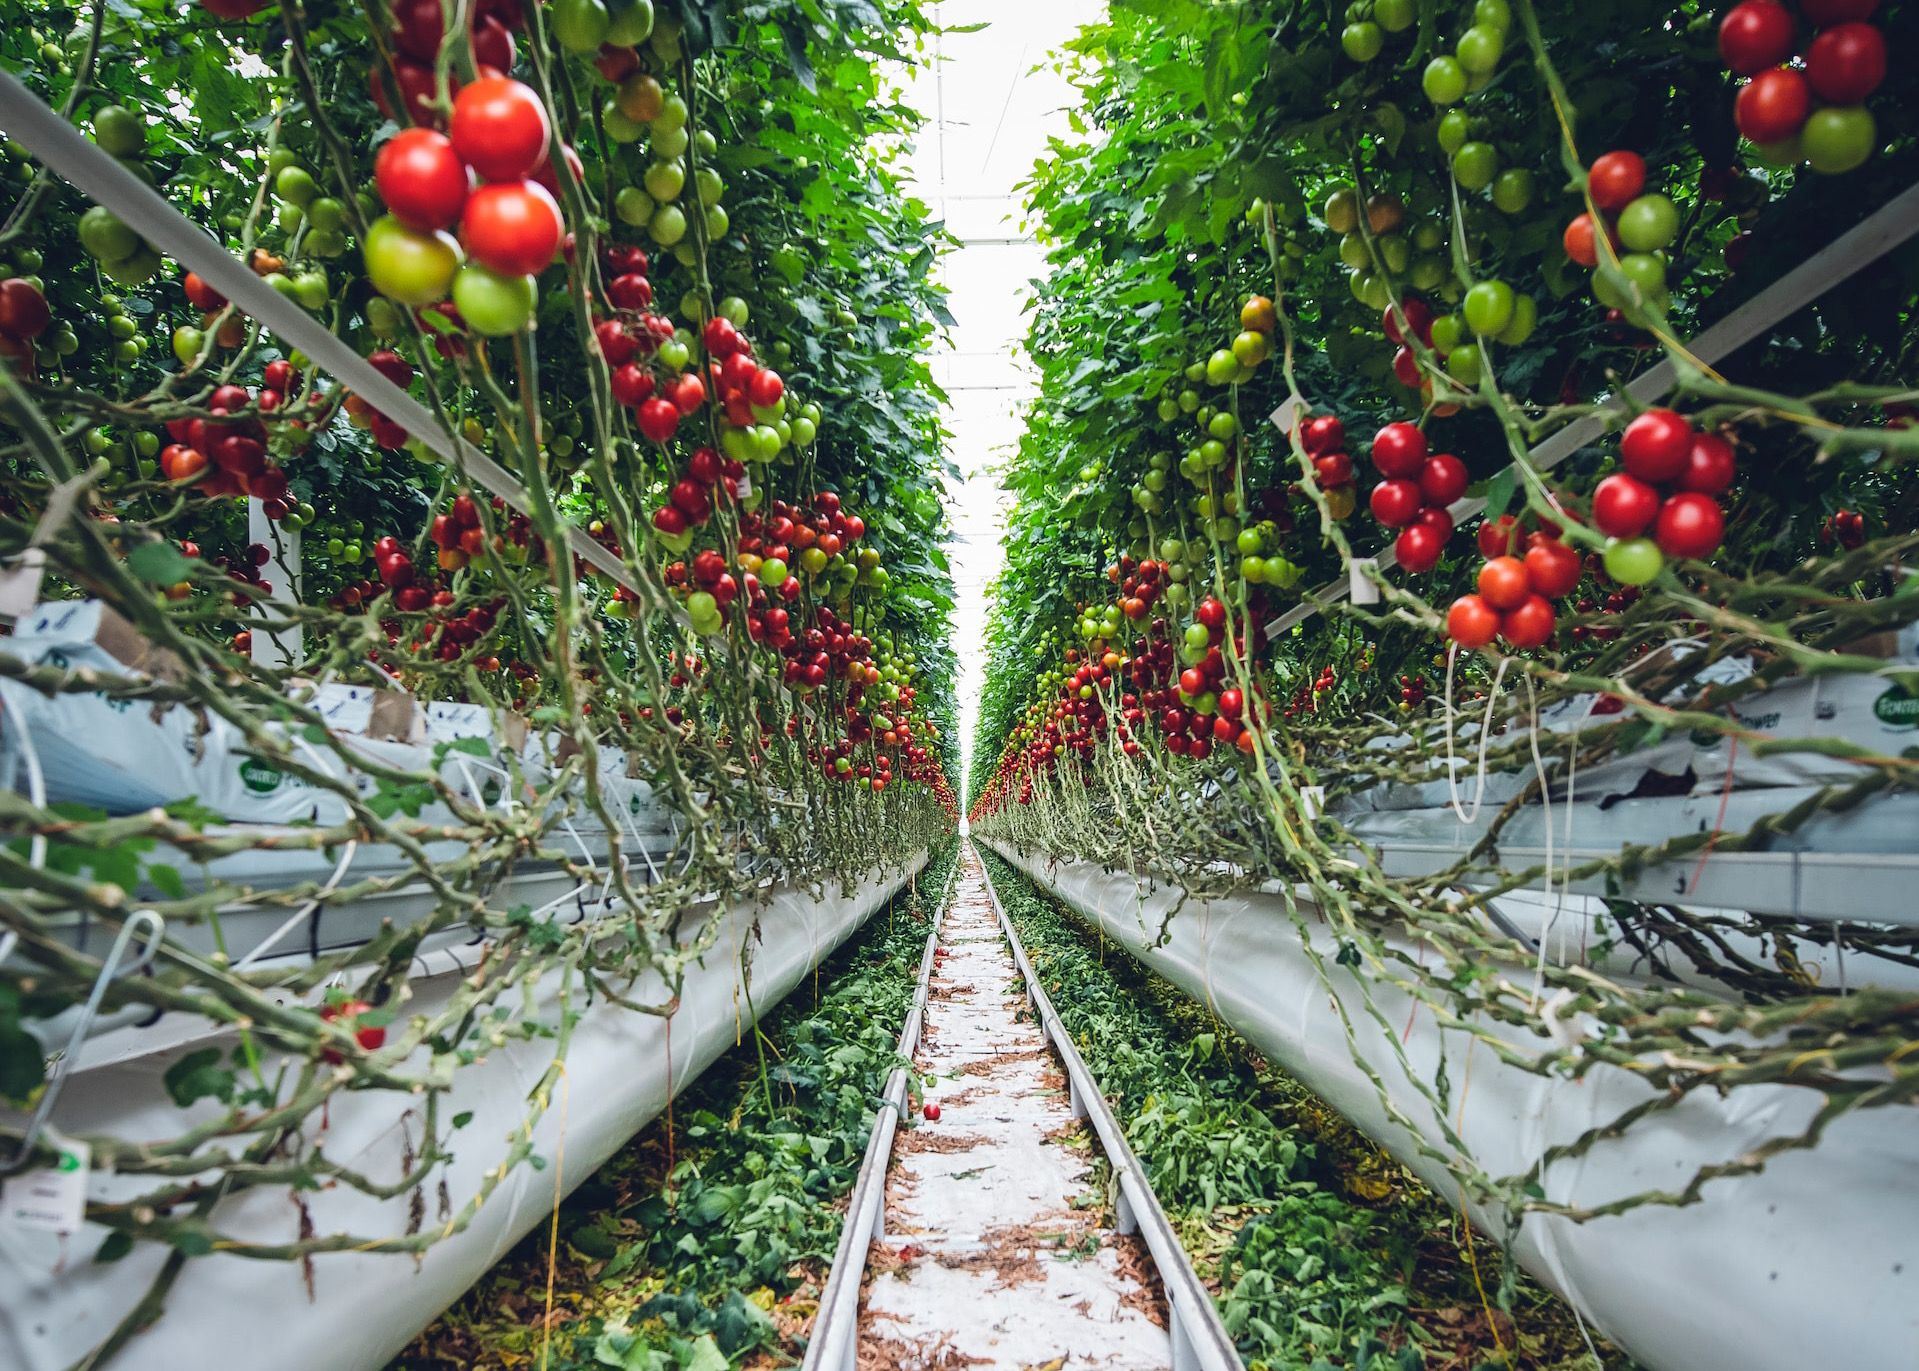 Vertical indoor farming of tomatoes.